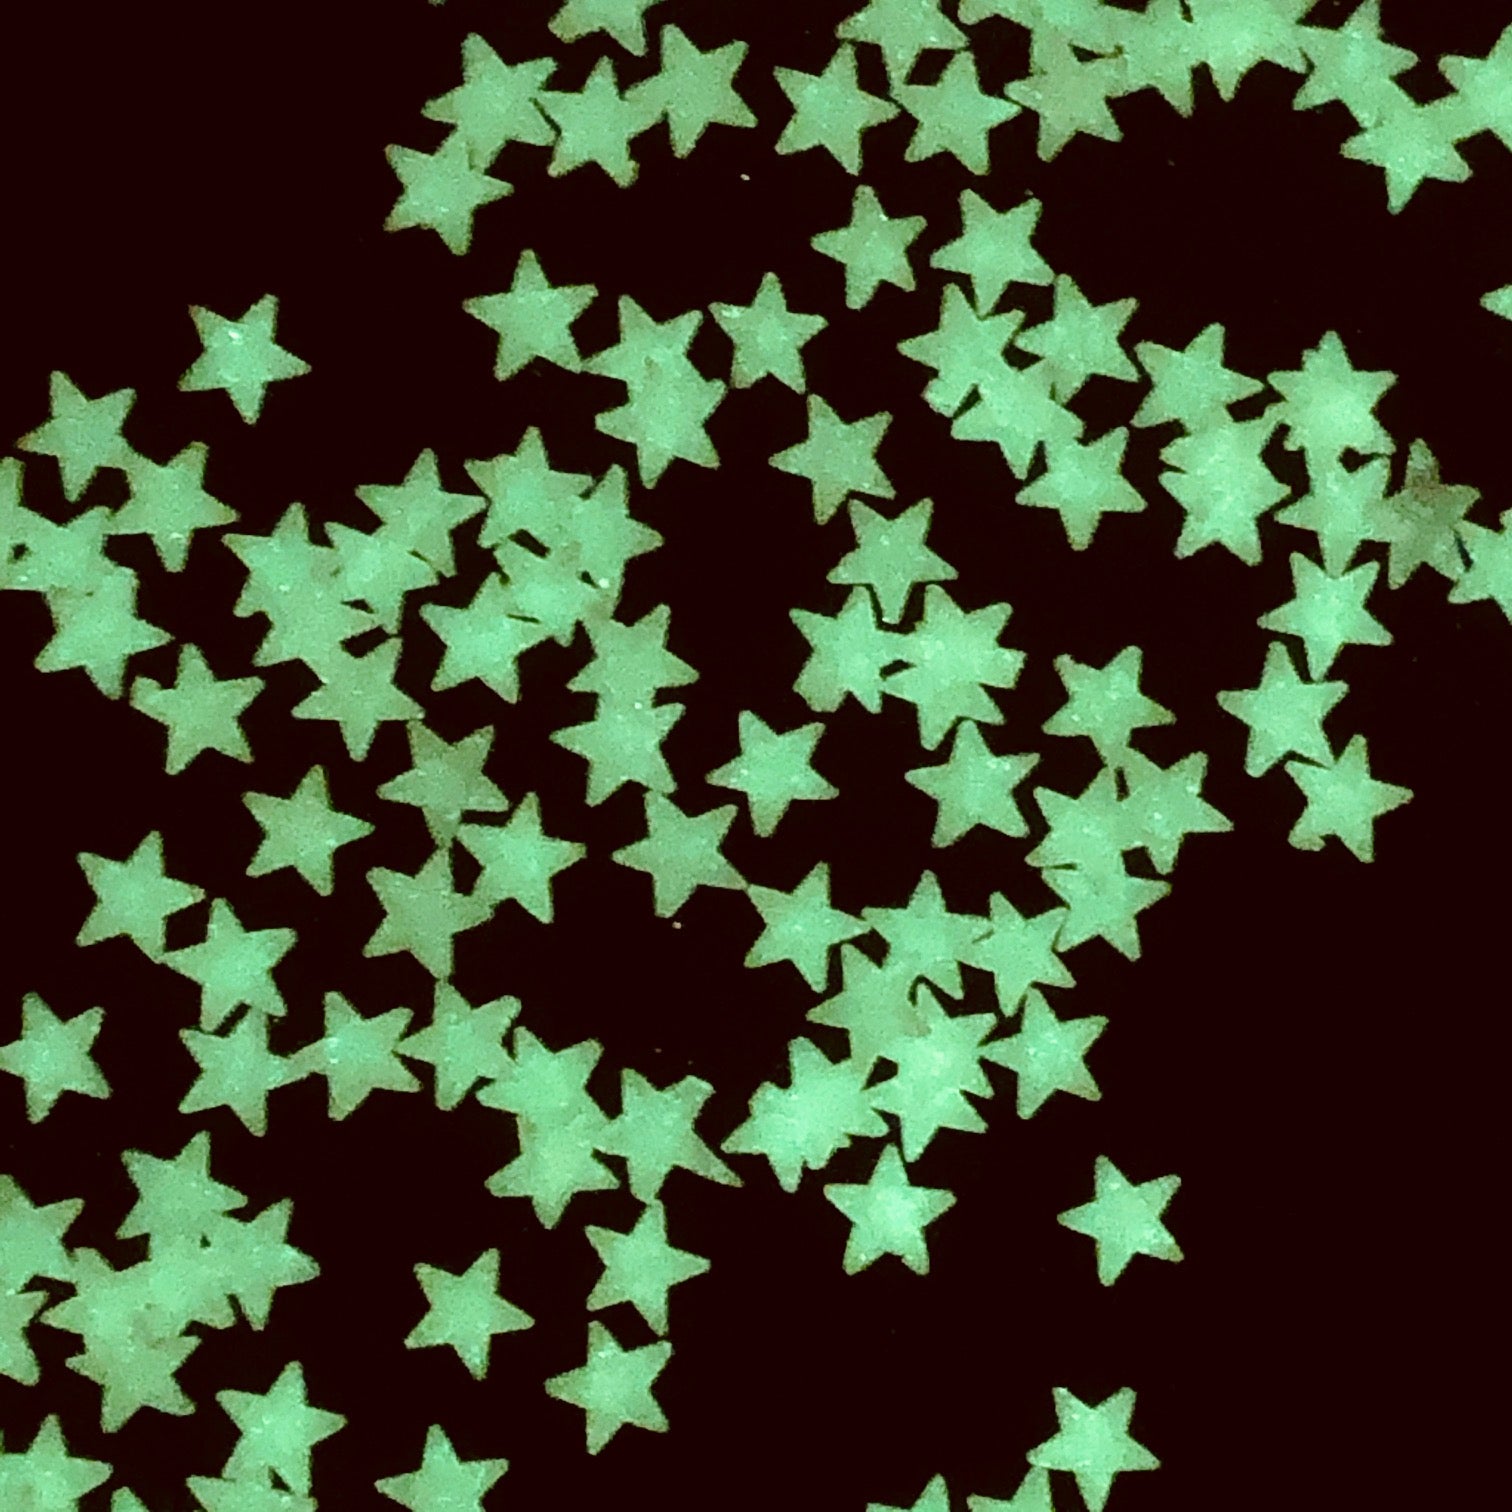 glow in the dark stars and